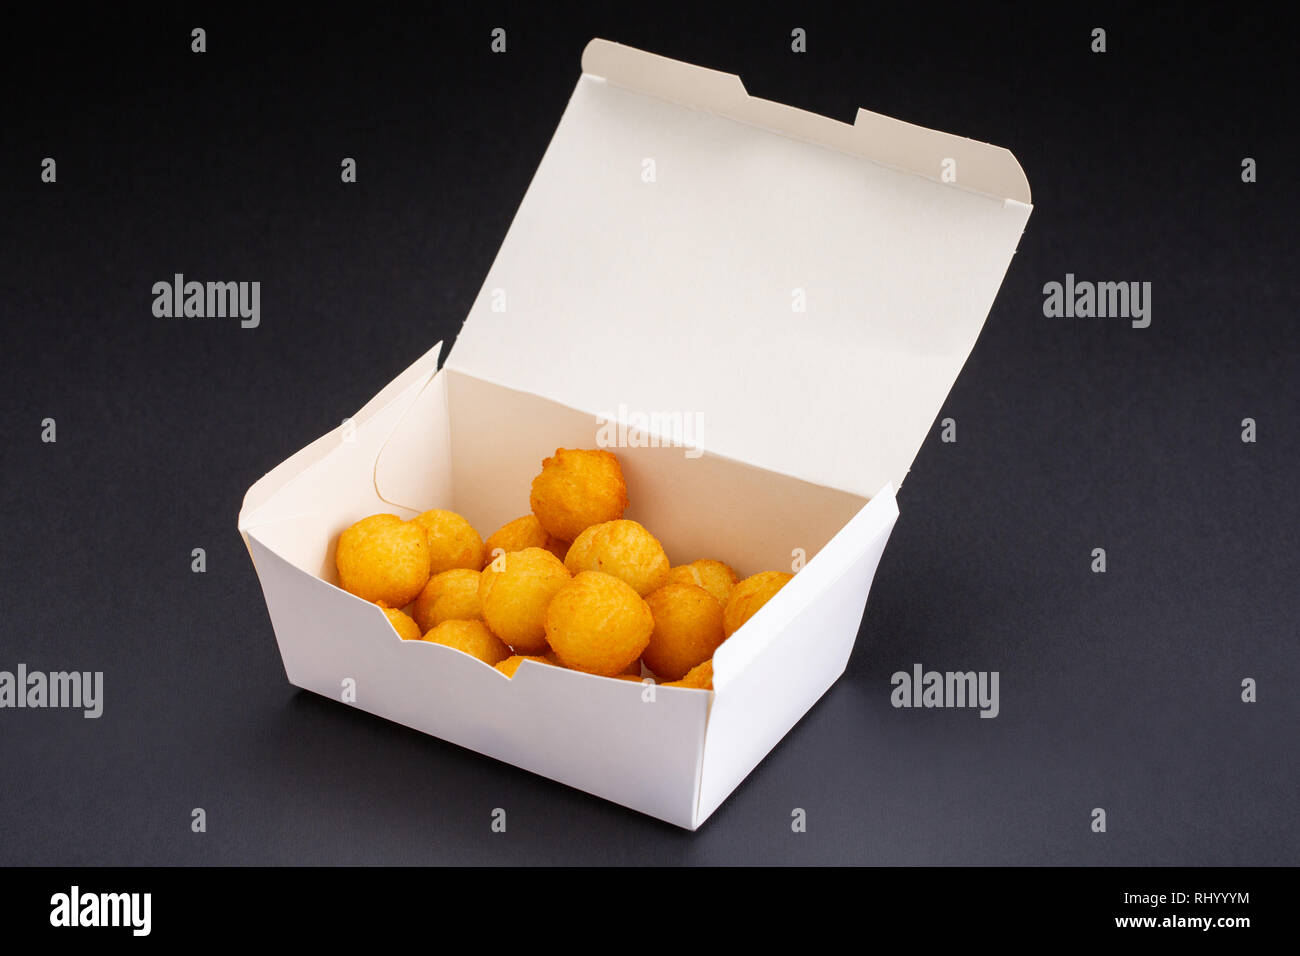 fried chicken balls in a whitebox on a black background. studio picture of fried chicken balls Stock Photo